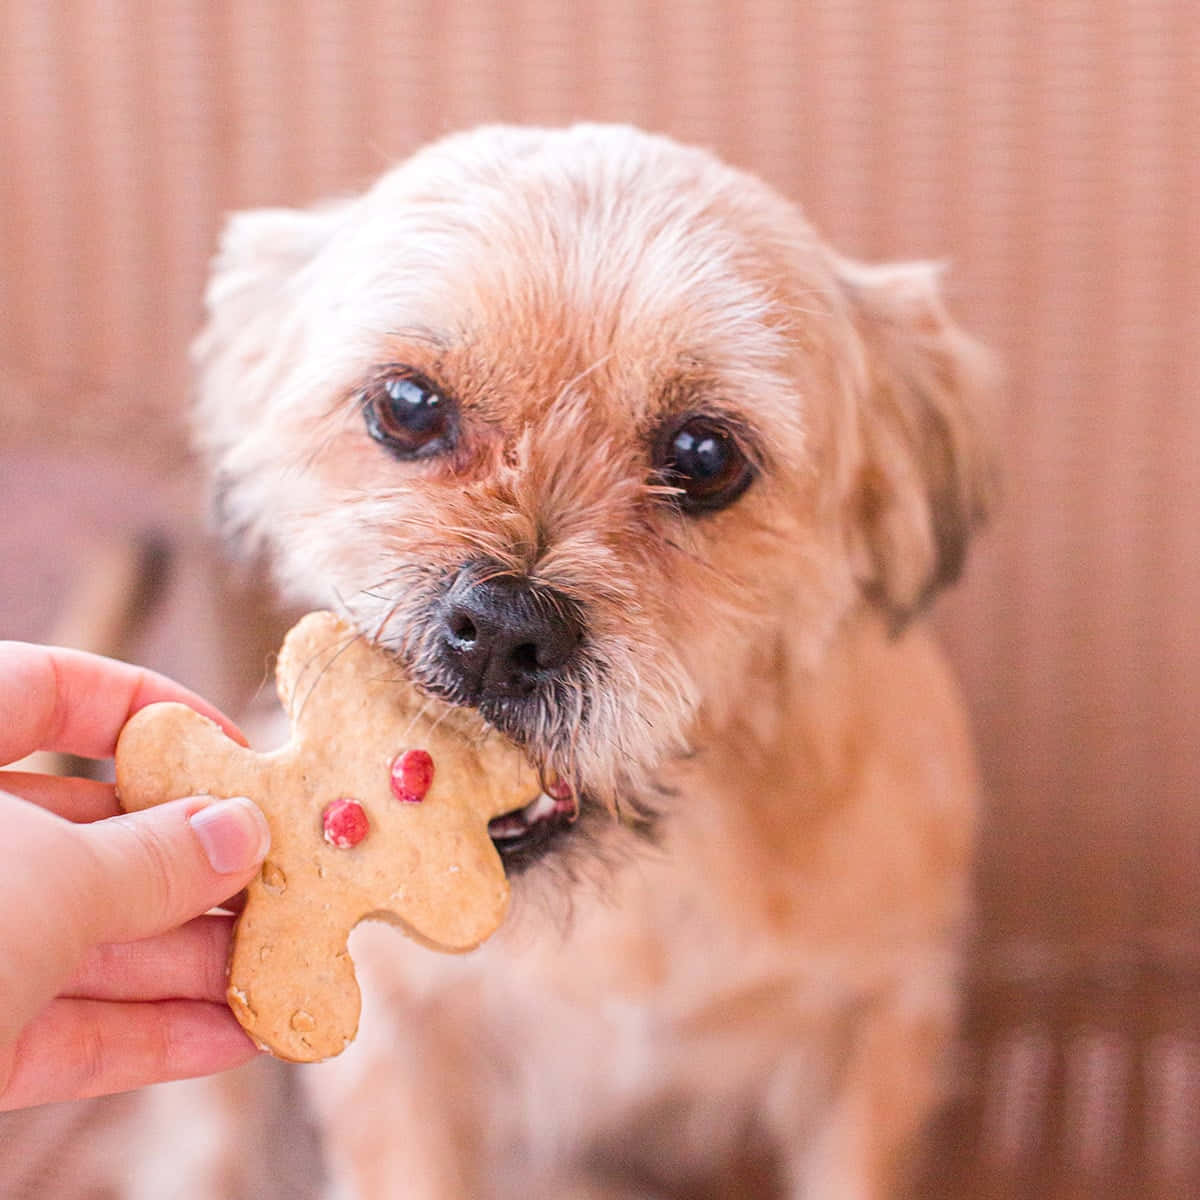 Dog Treat Gingerbread Man Eaten By Dog Picture